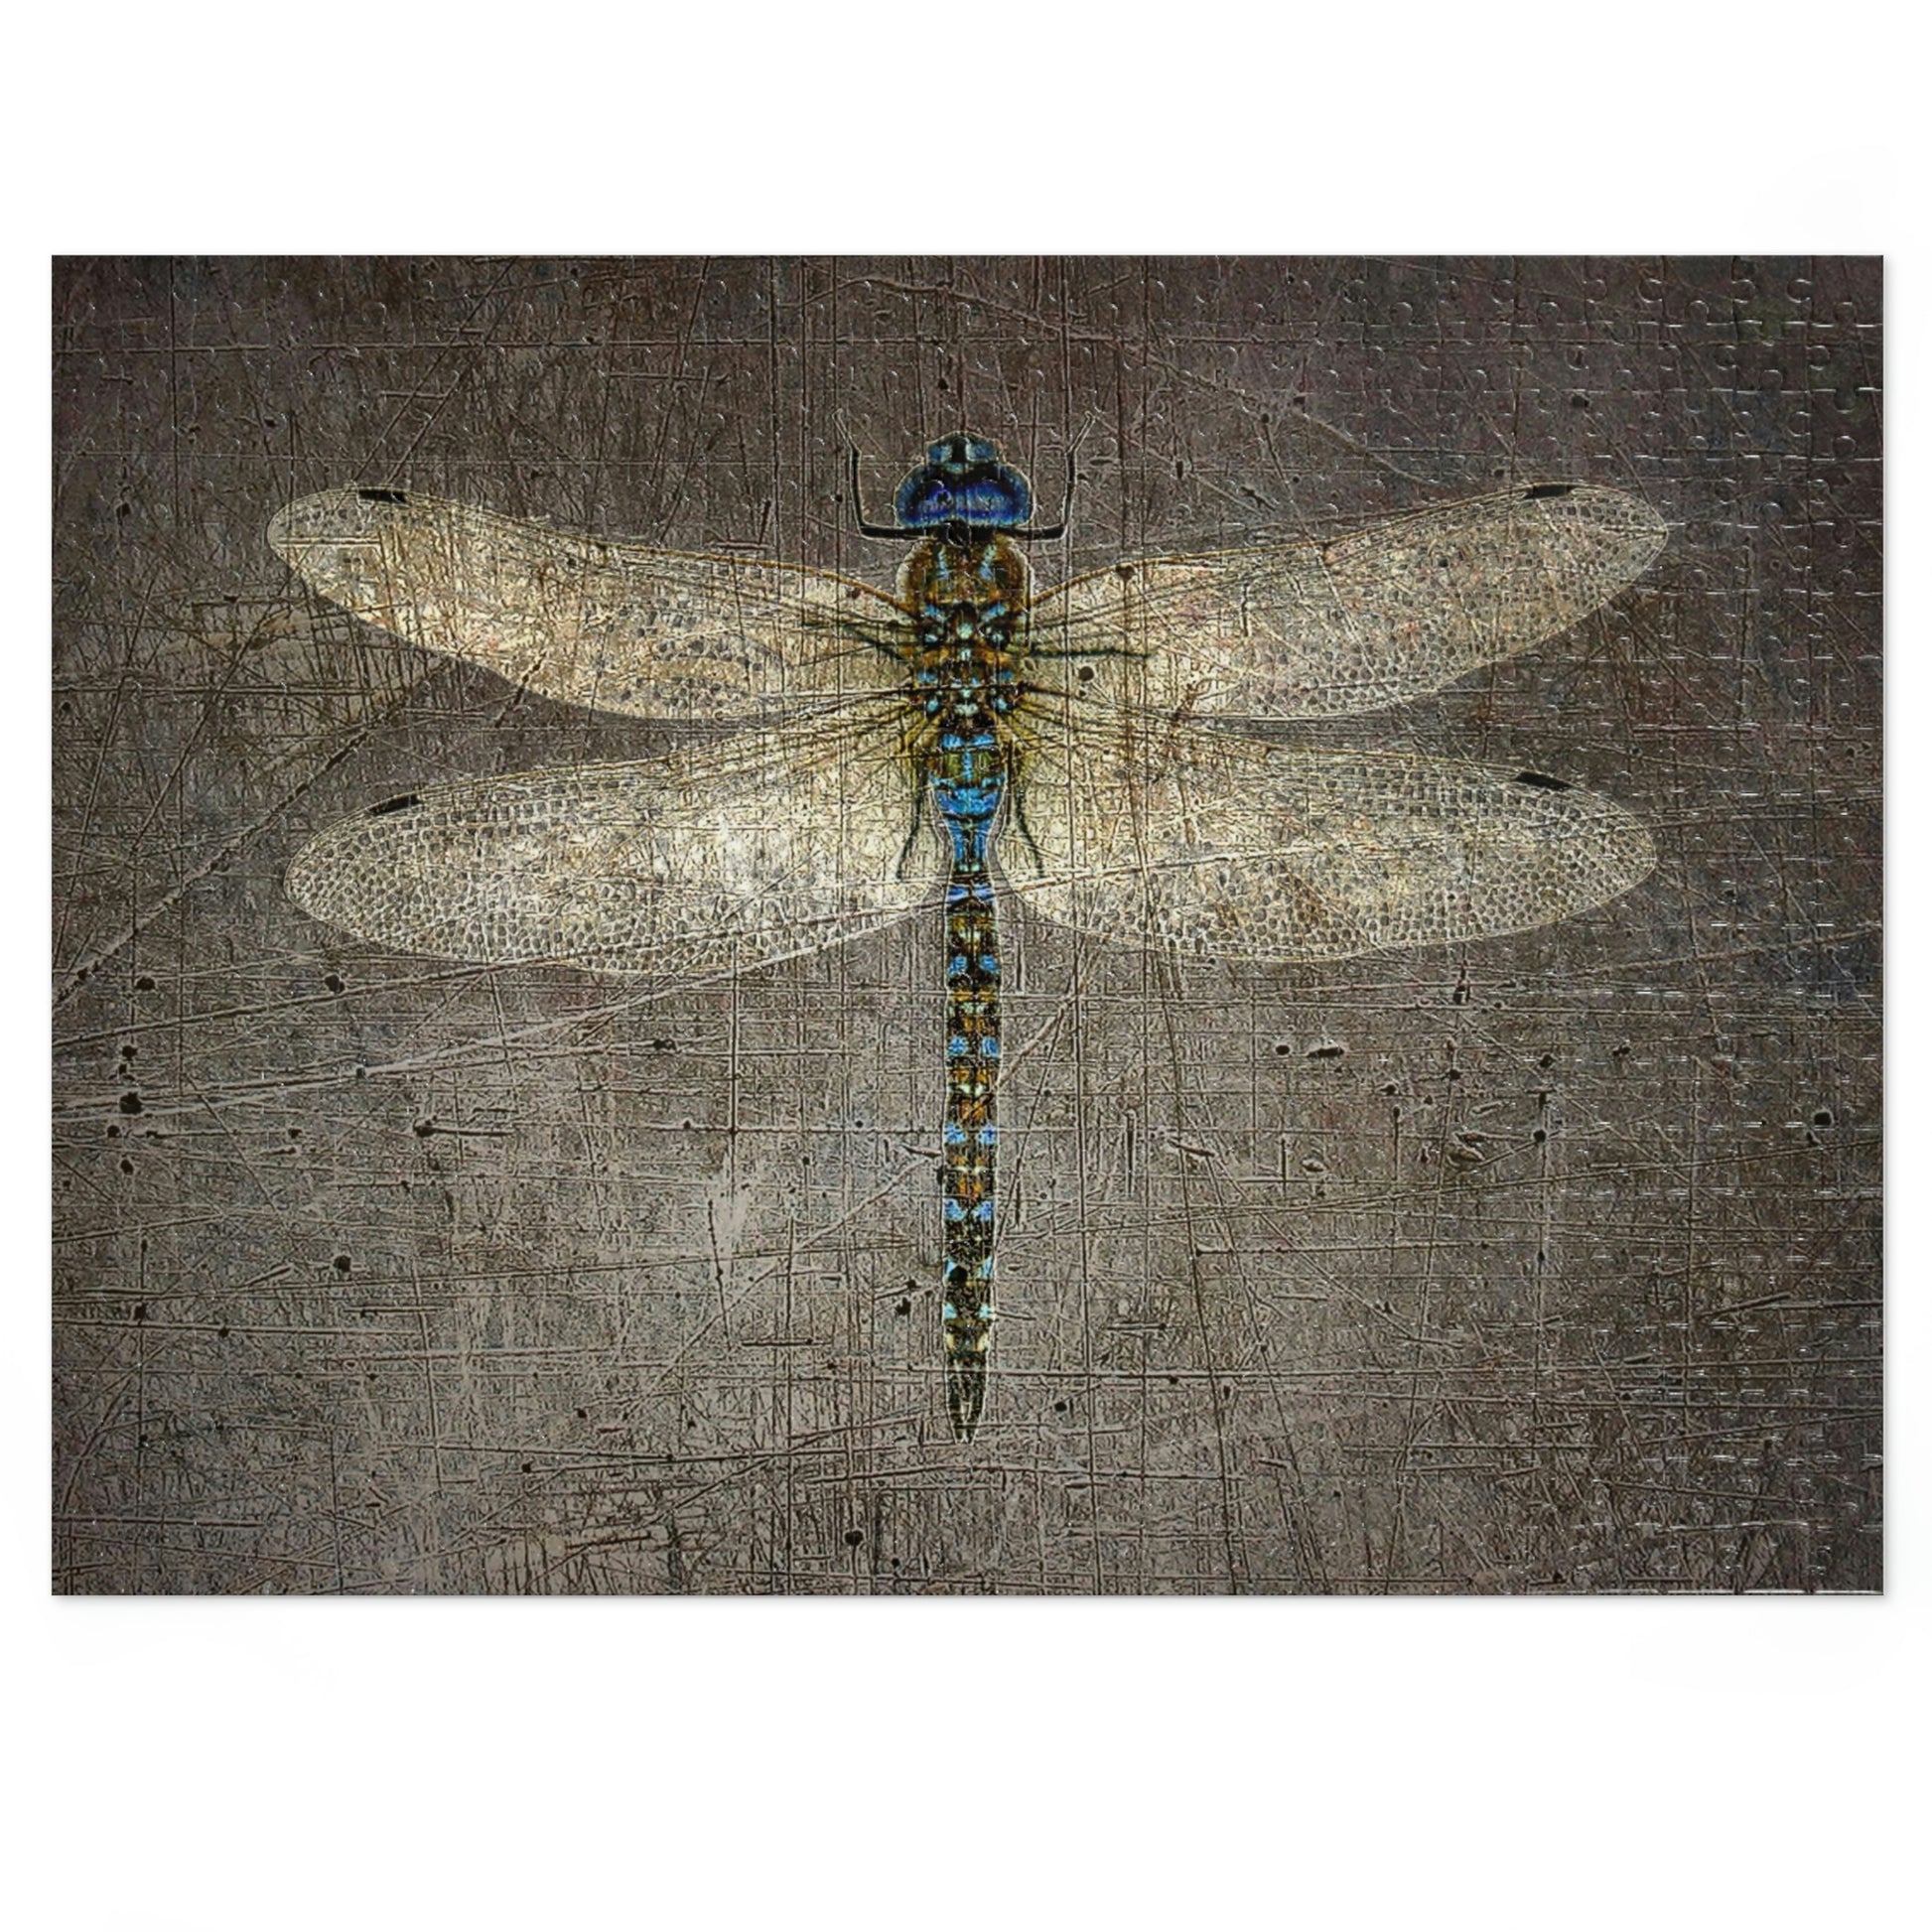 Dragonfly on Distressed Granite Background Puzzle 500 pieces